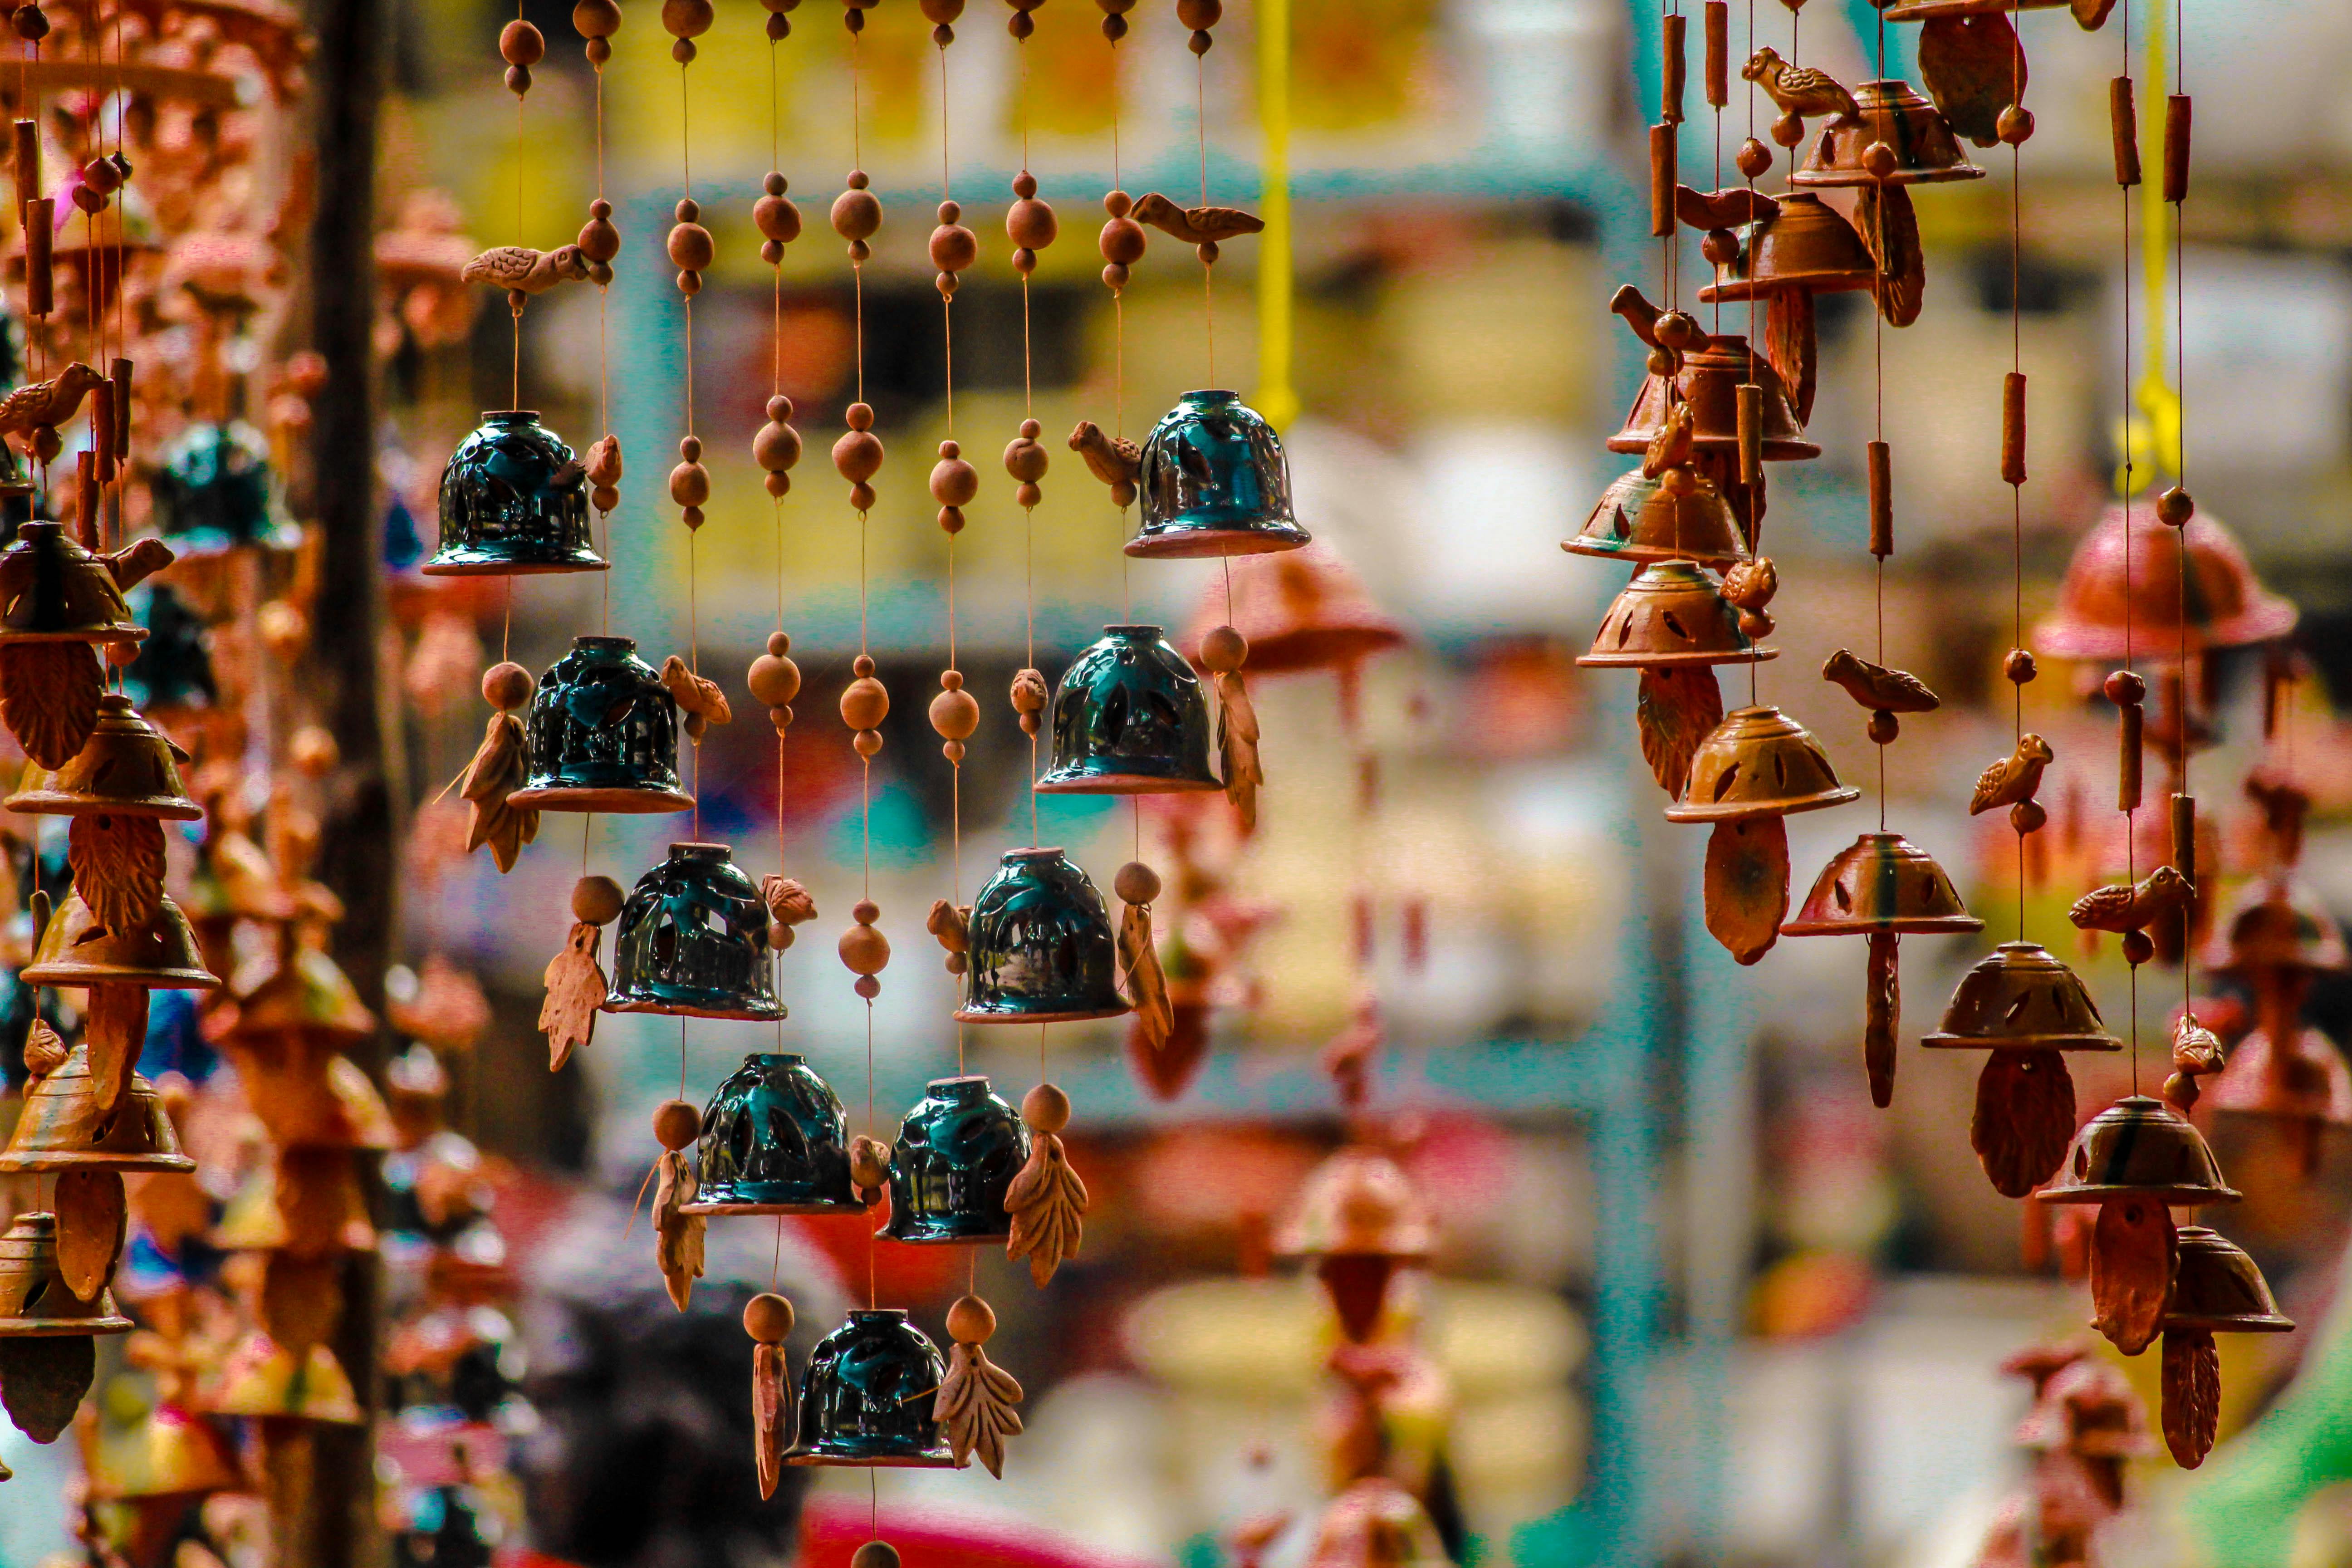 ornaments hanging for sale in market